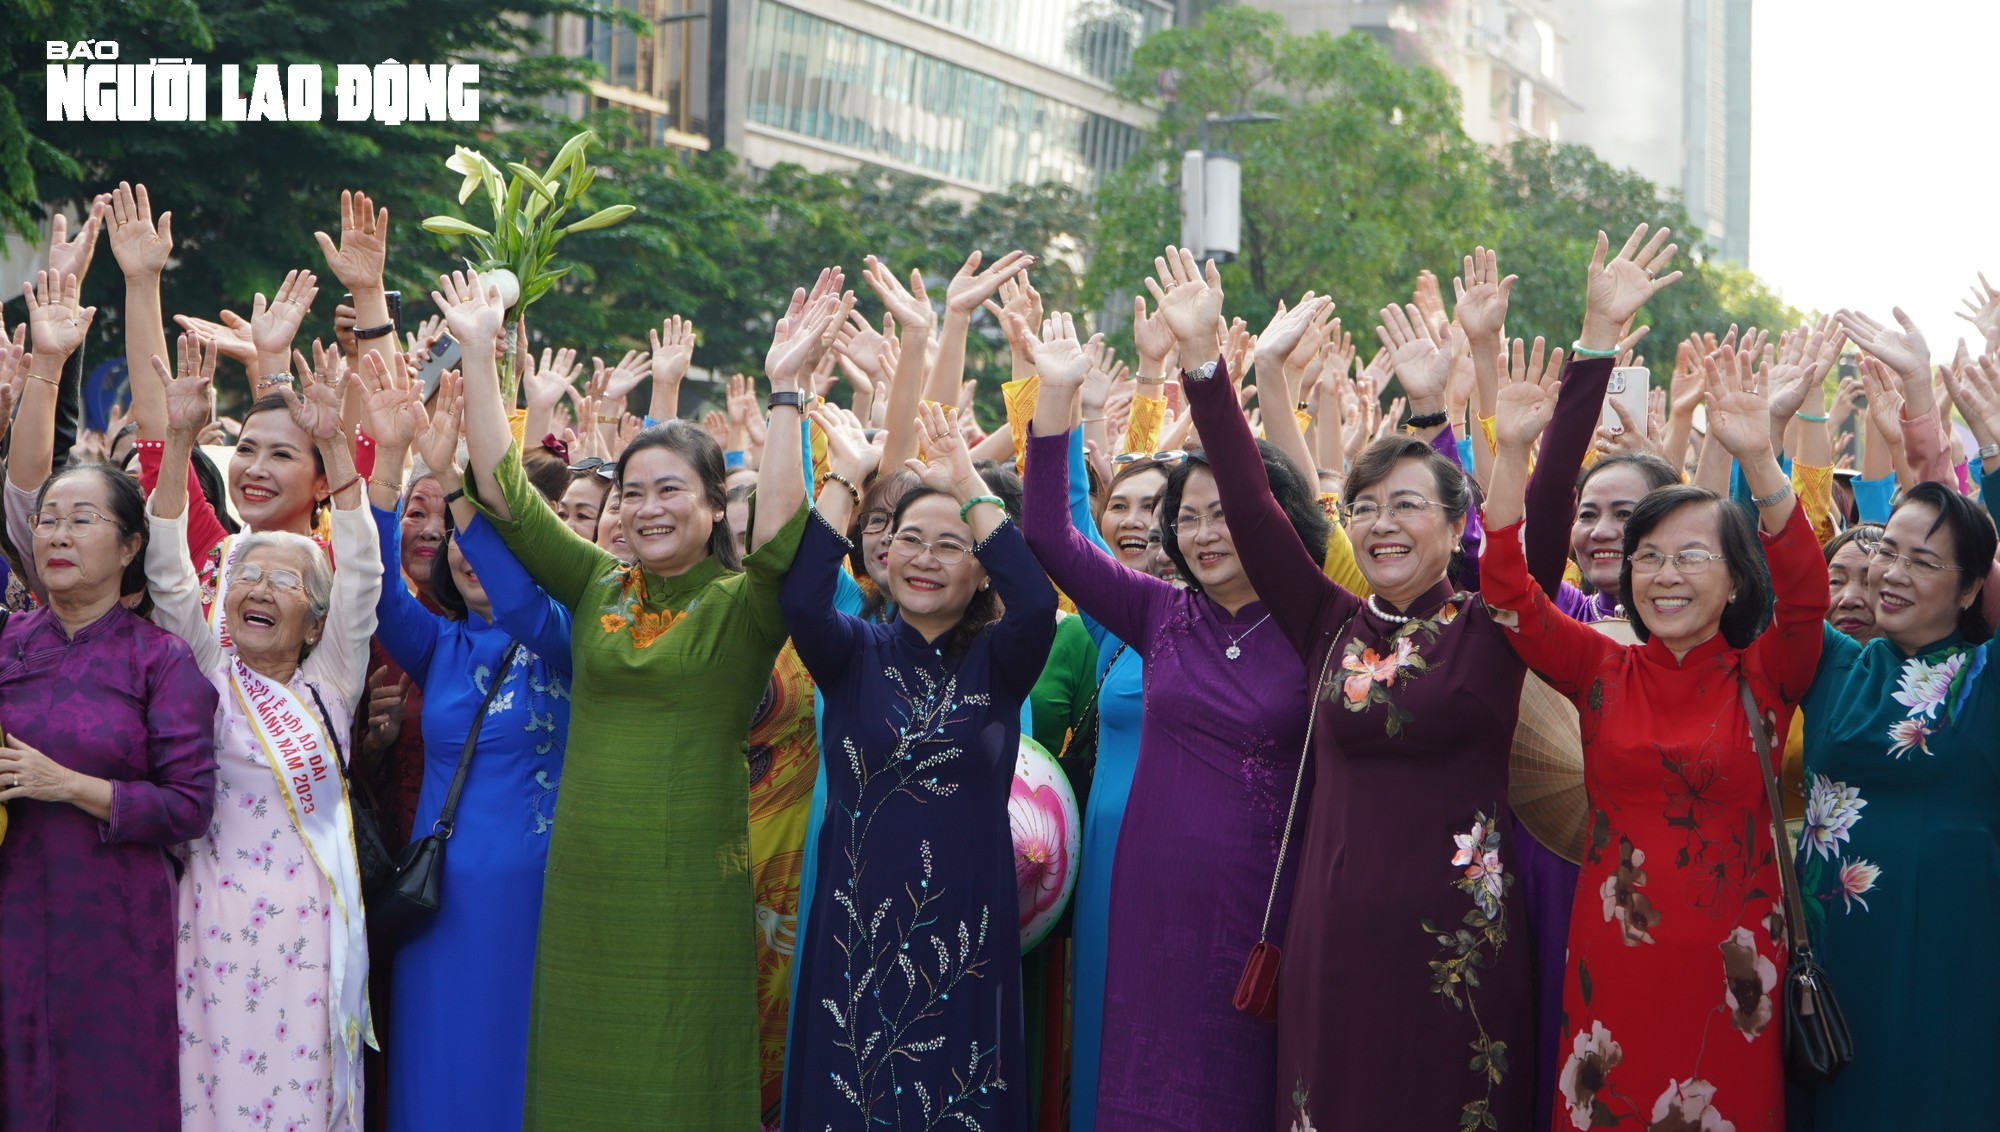 More than 3,000 people perform Ao Dai on the streets of Ho Chi Minh City - Photo 4.